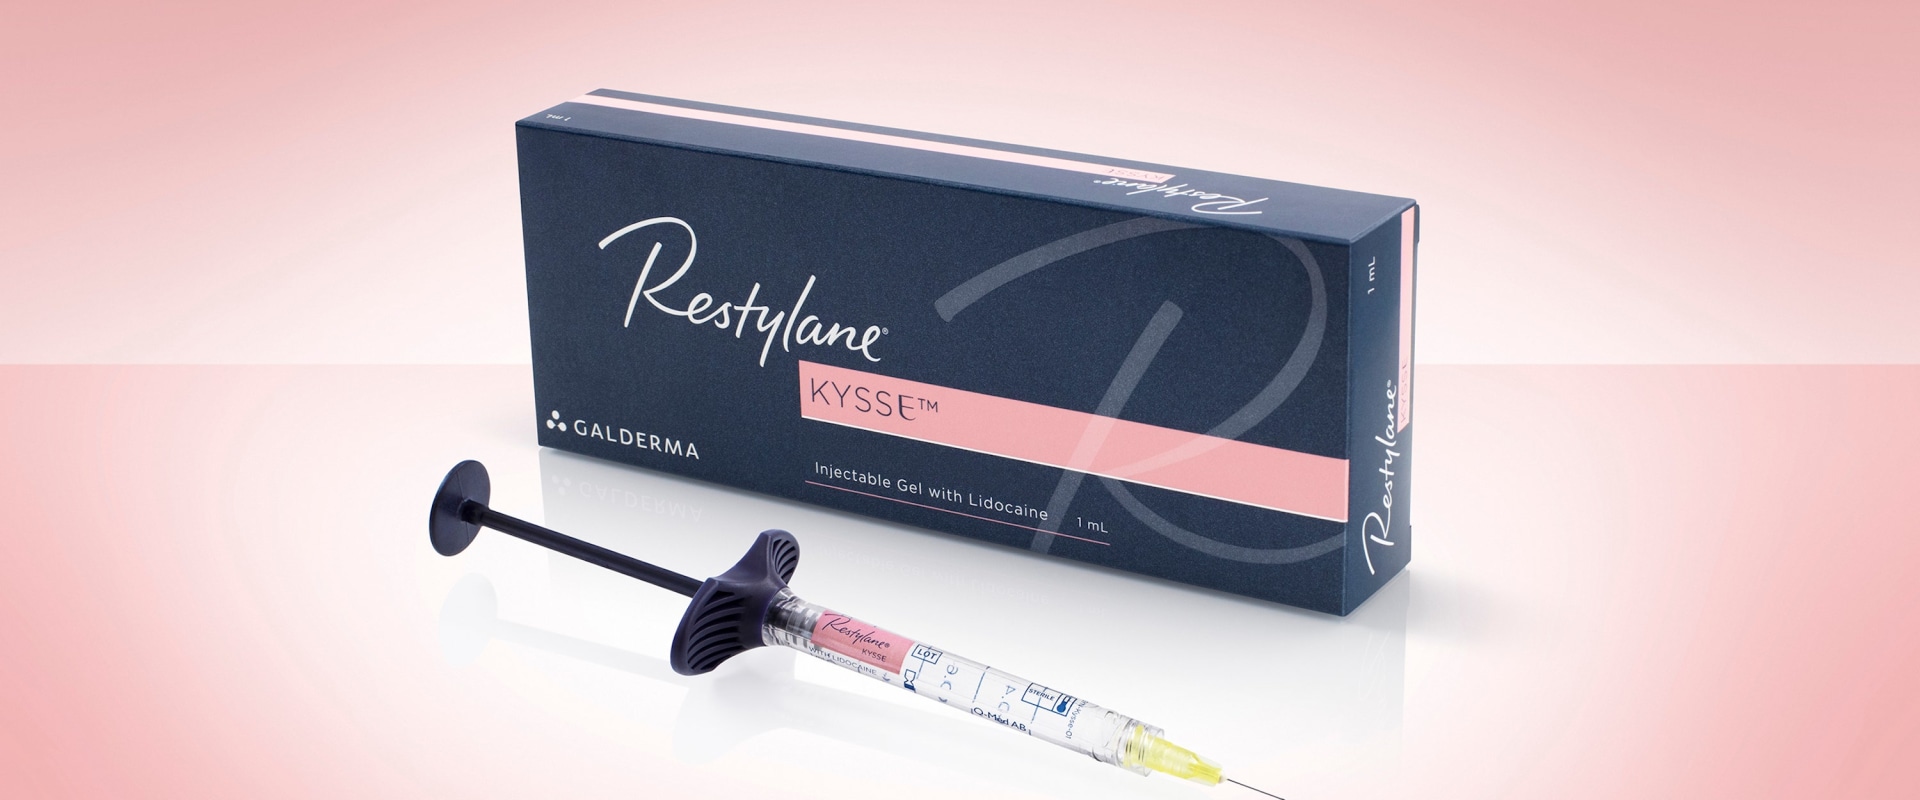 Restylane an Injectable filler